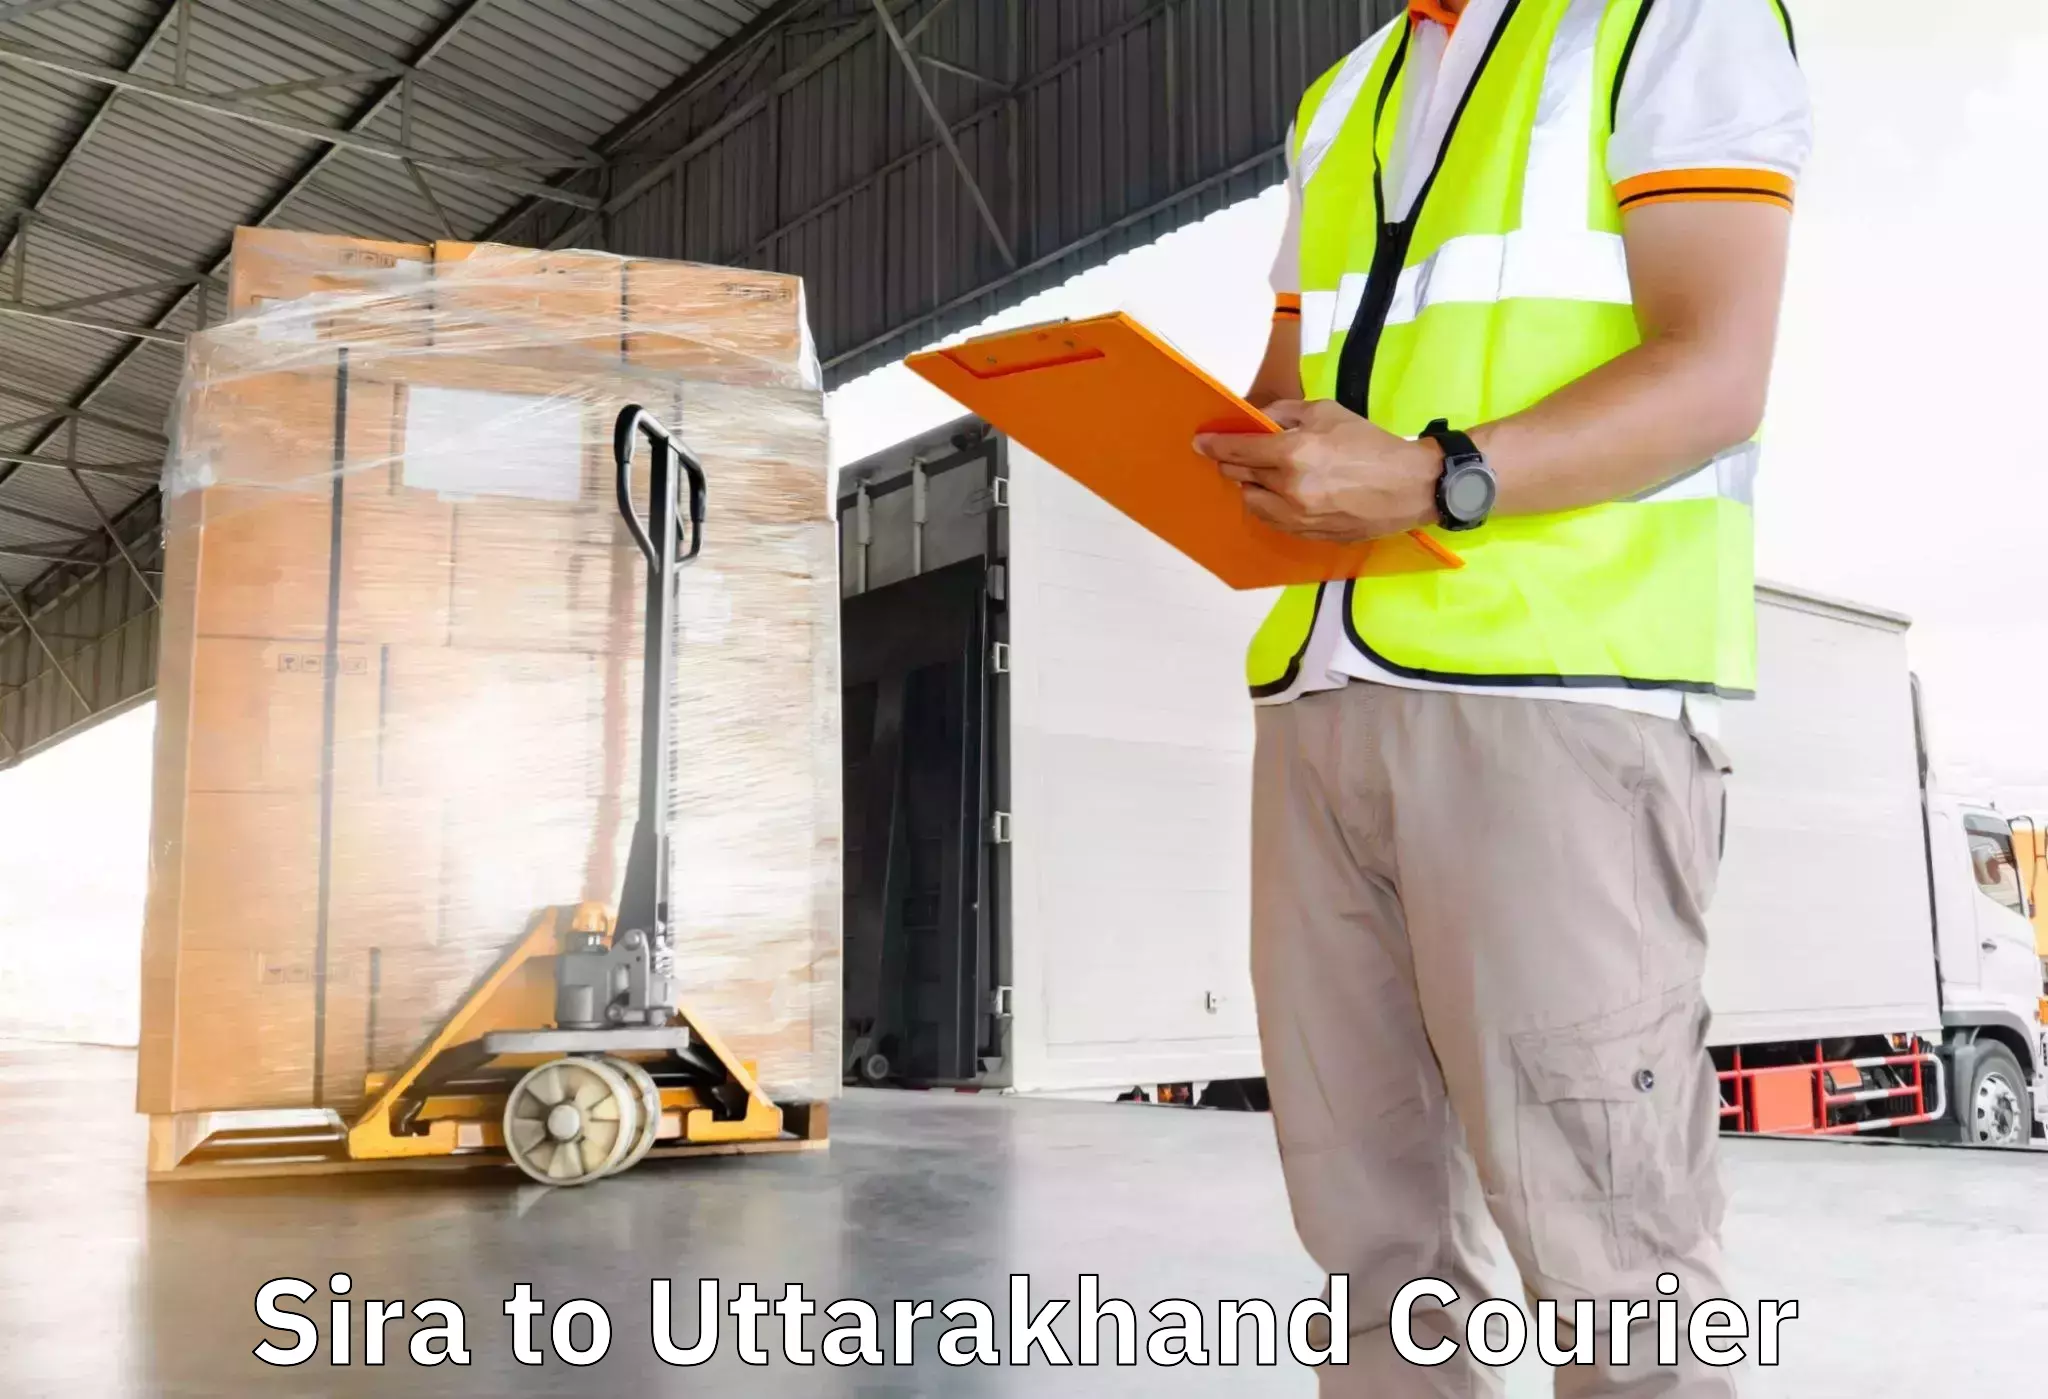 Furniture delivery service Sira to Rishikesh